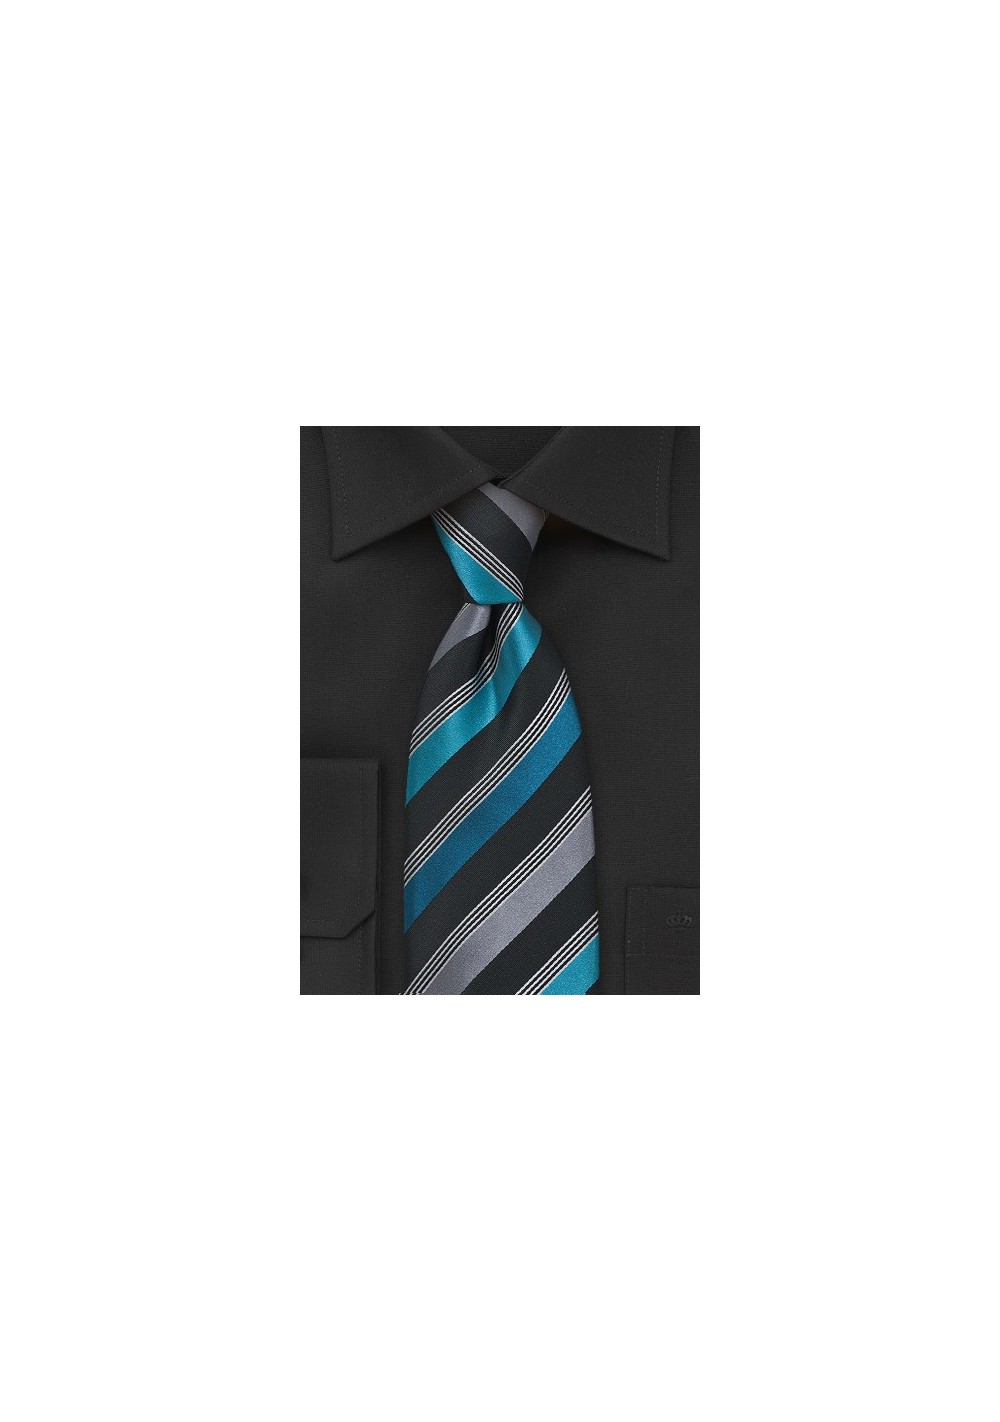 Striped Tie in Teal and Black